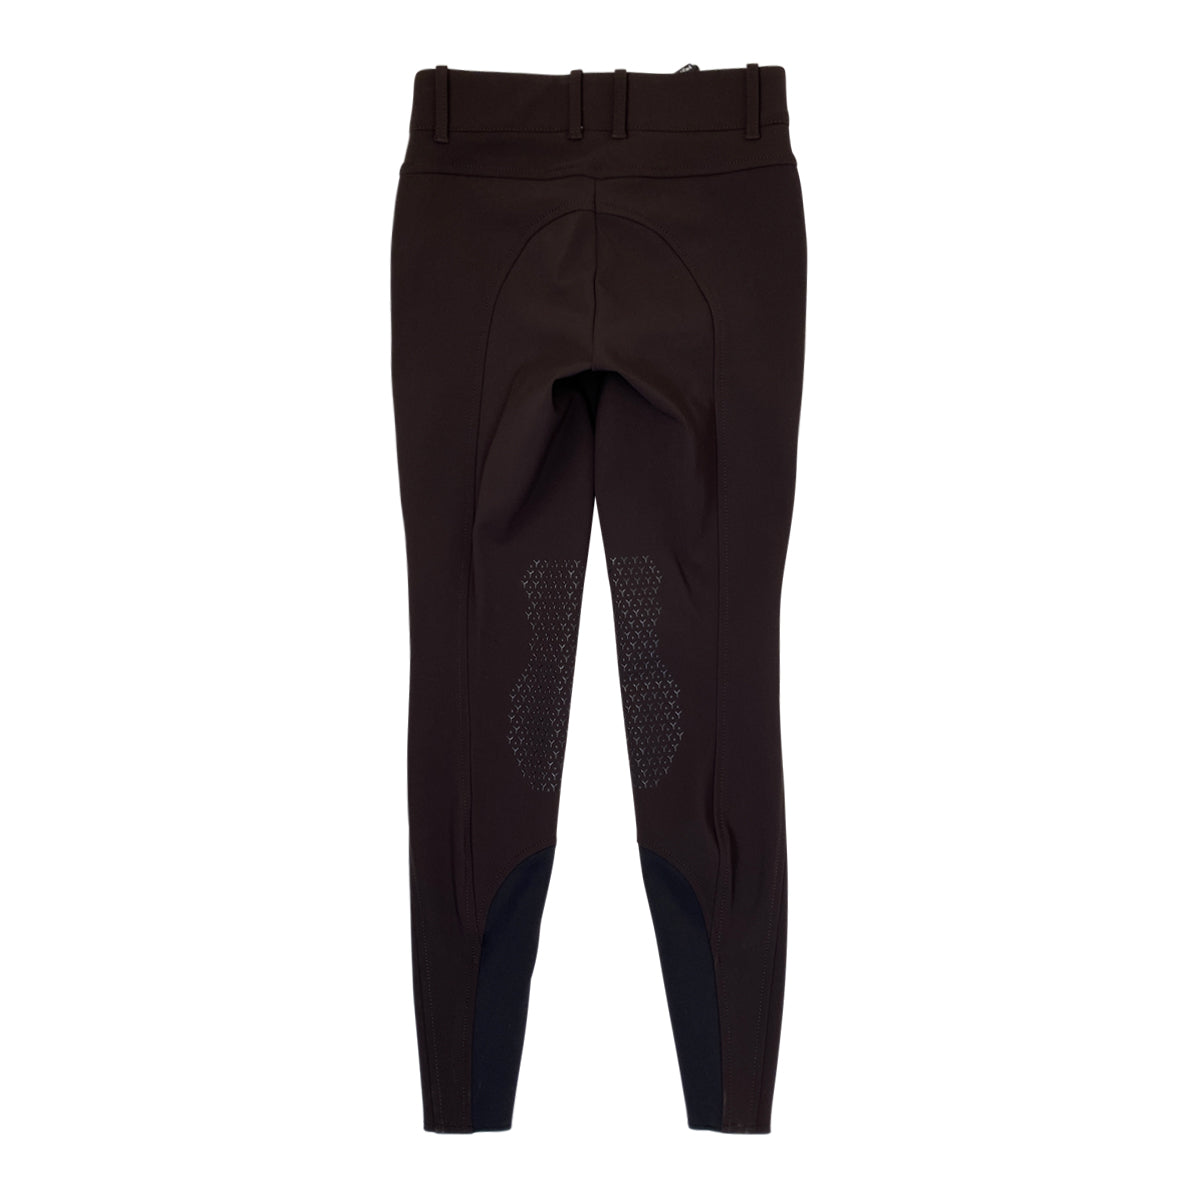 Equiline 'Ernaek' B-Move Breeches in Brown